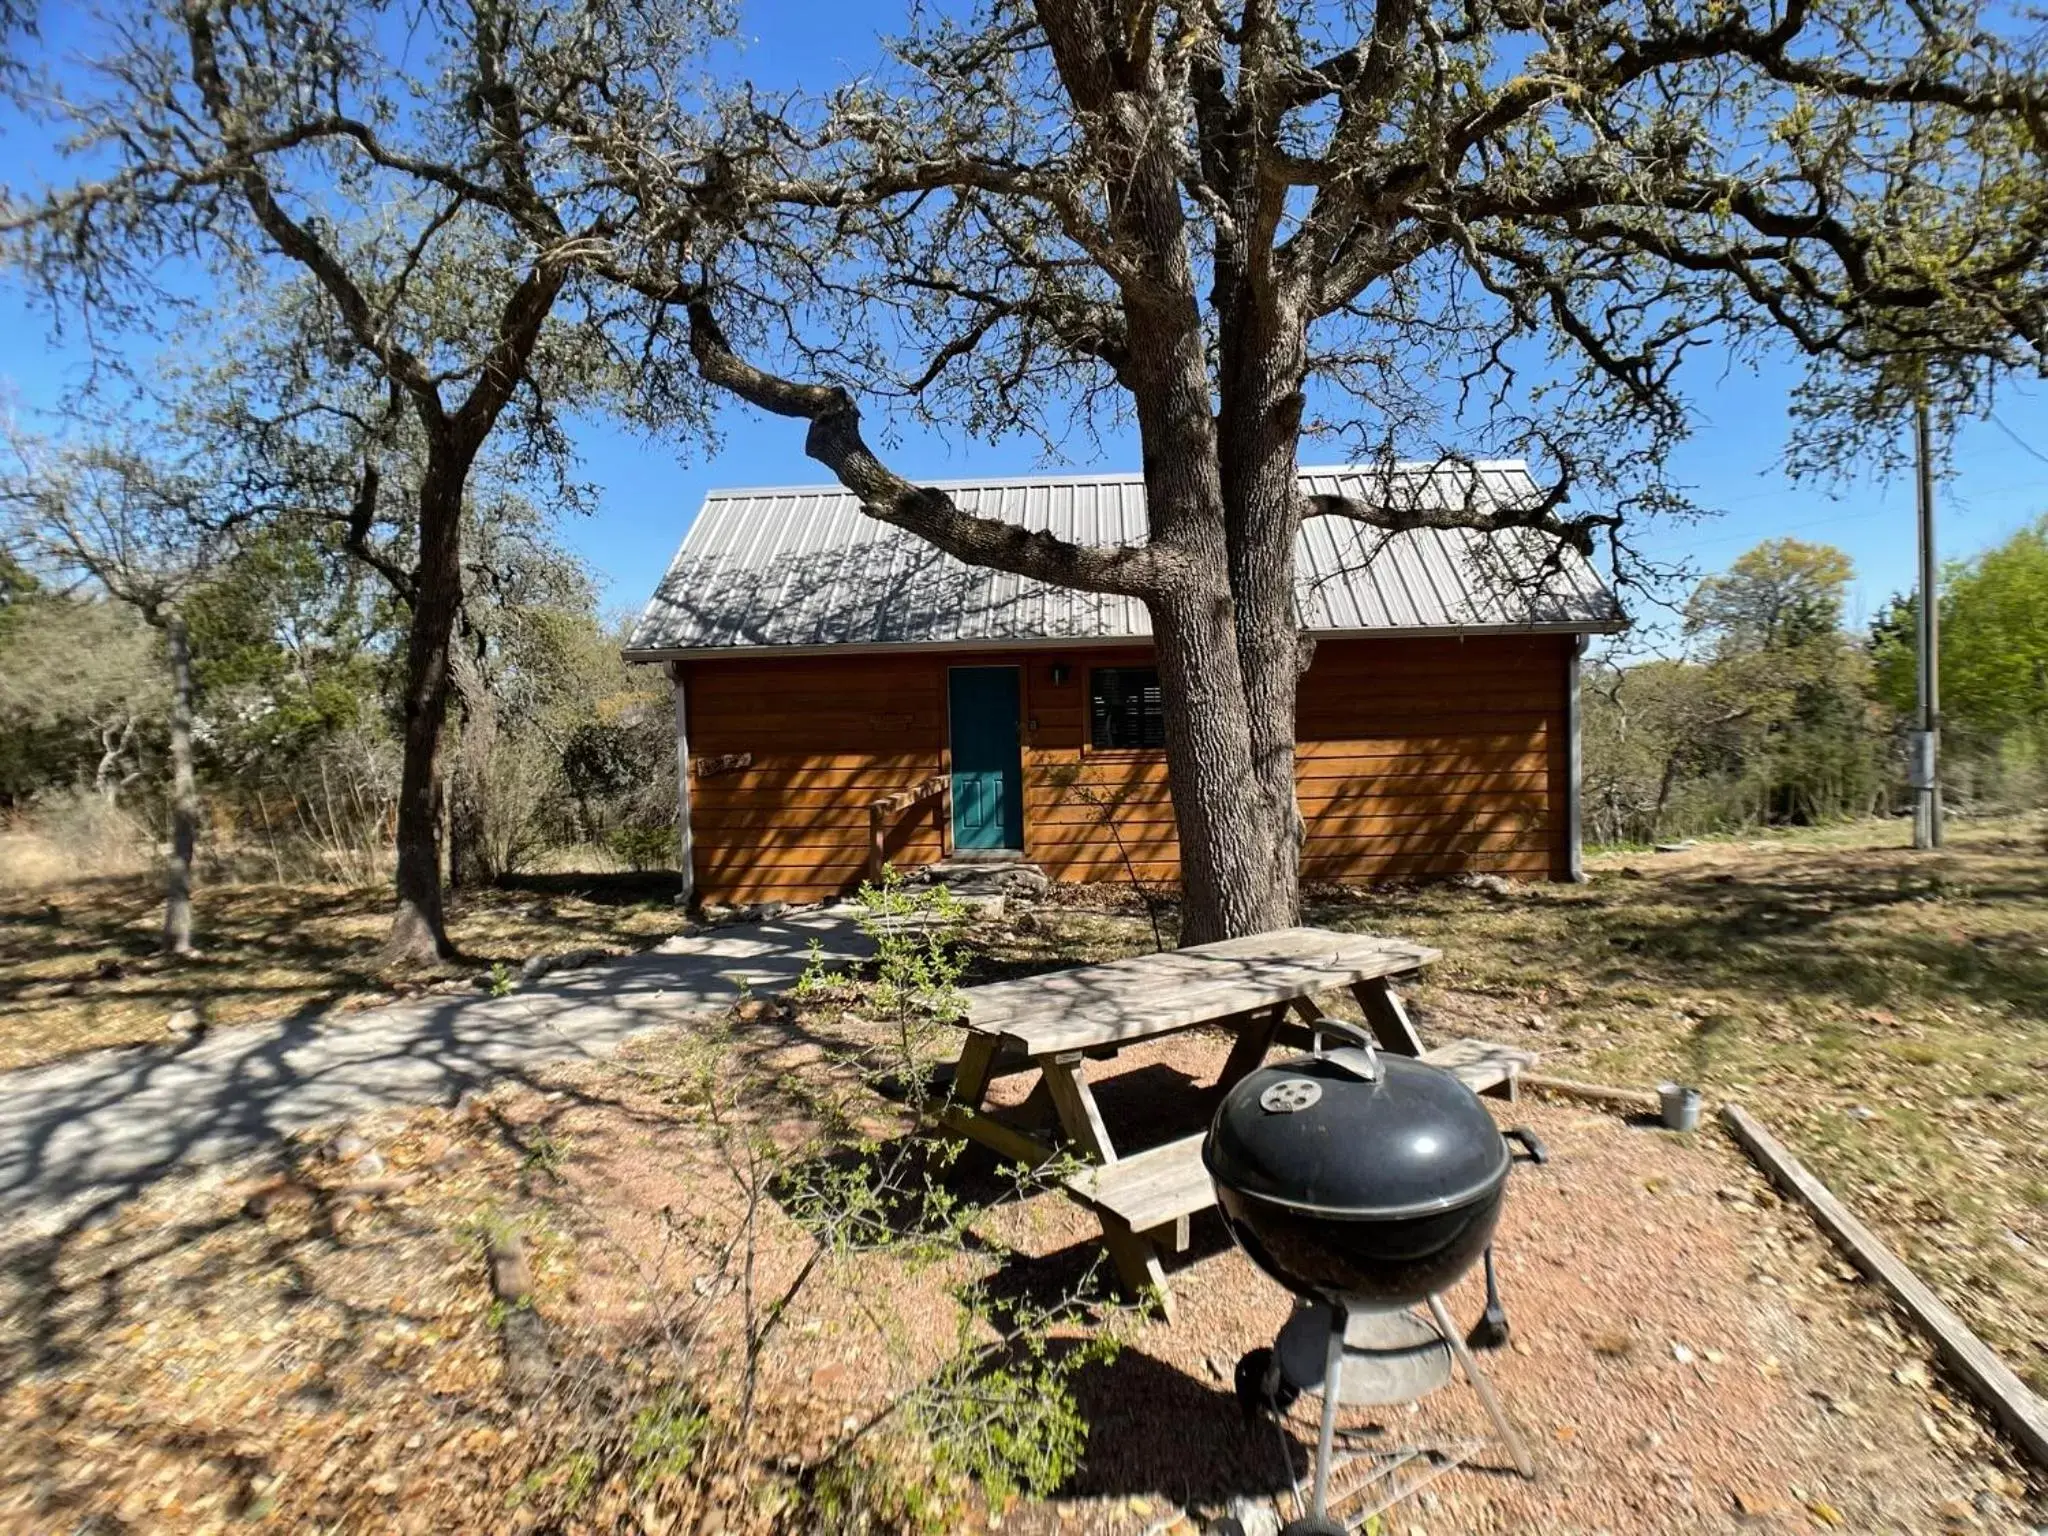 Property building in Walnut Canyon Cabins